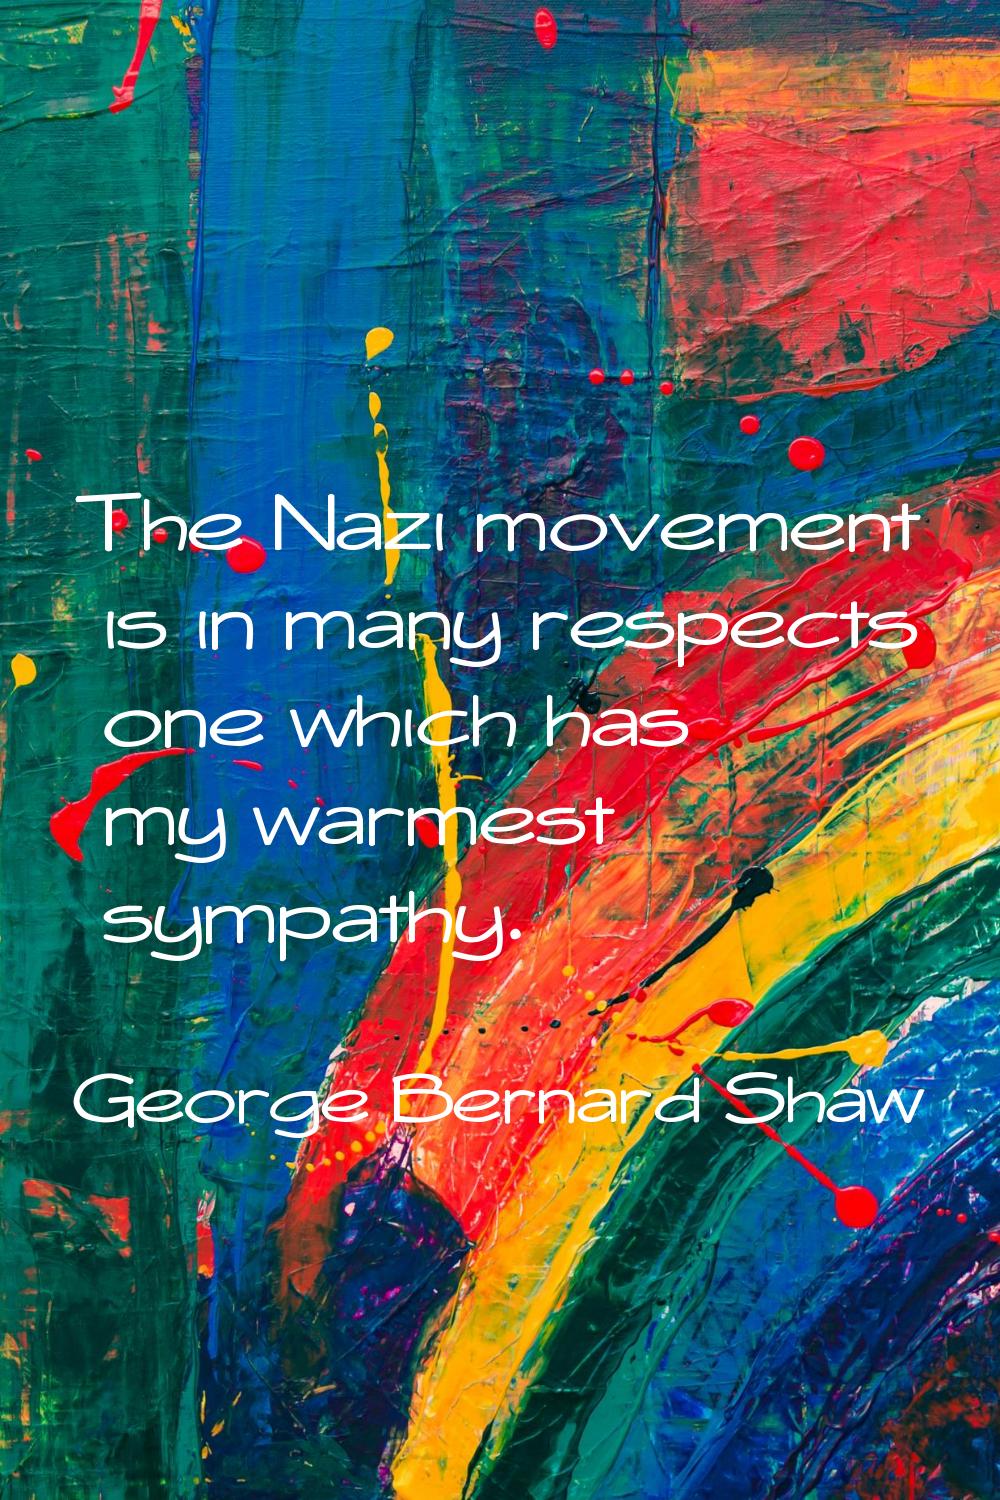 The Nazi movement is in many respects one which has my warmest sympathy.